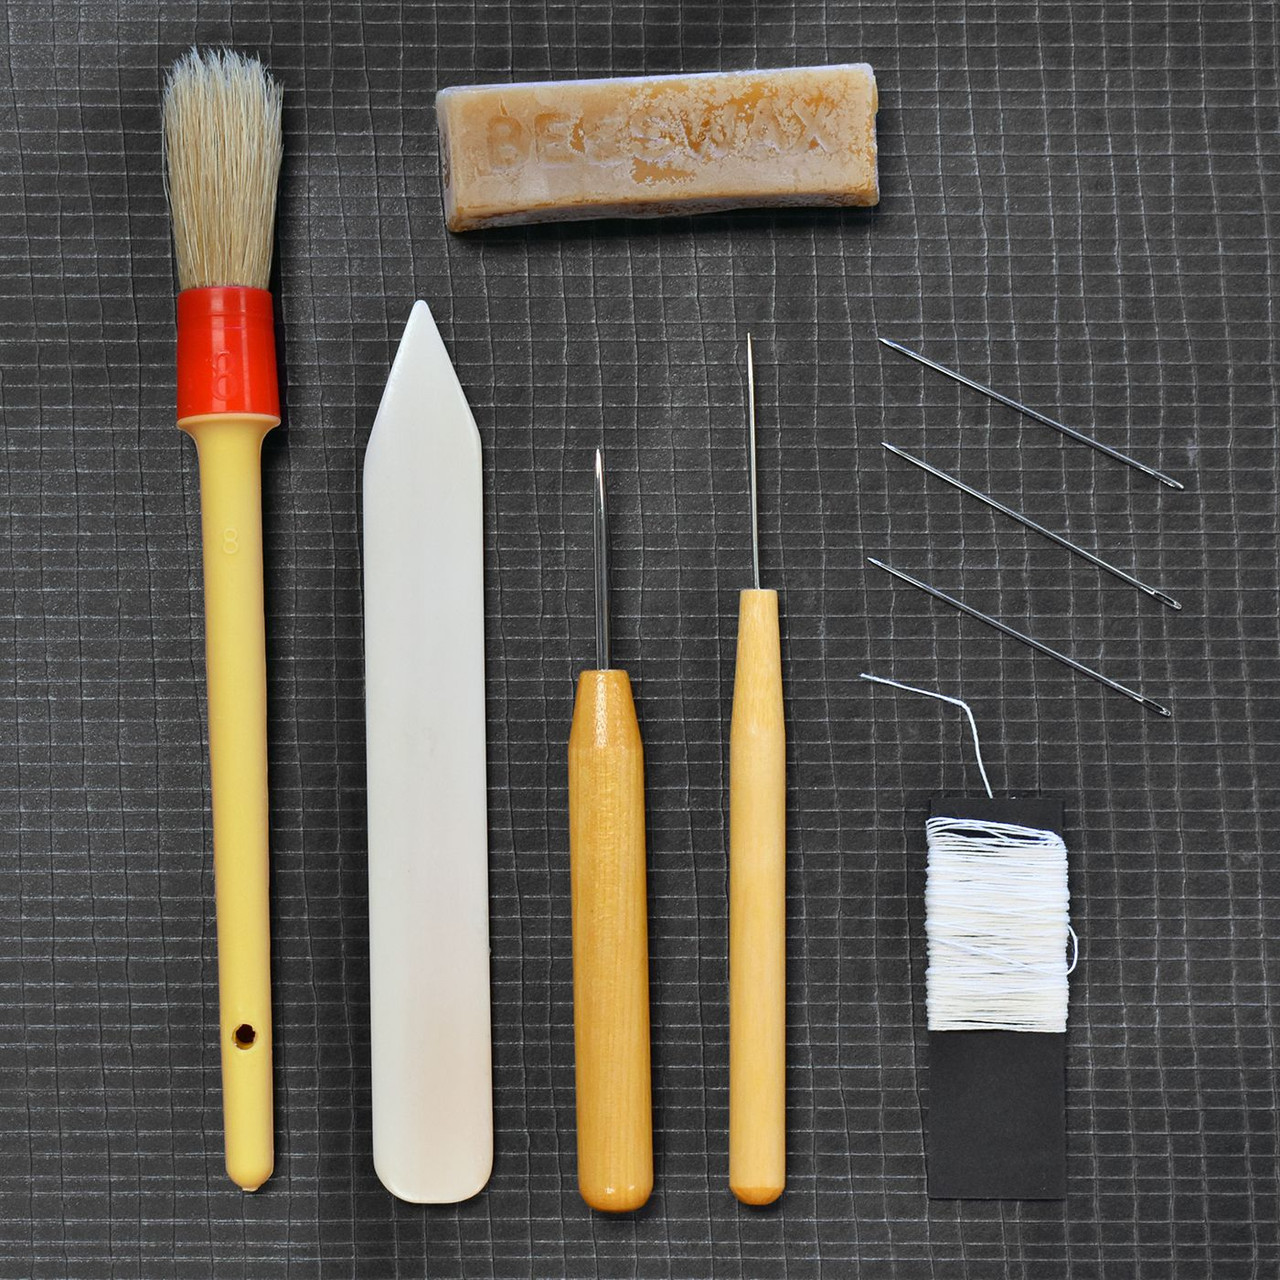 Books by Hand Bookbinding Tool Kit